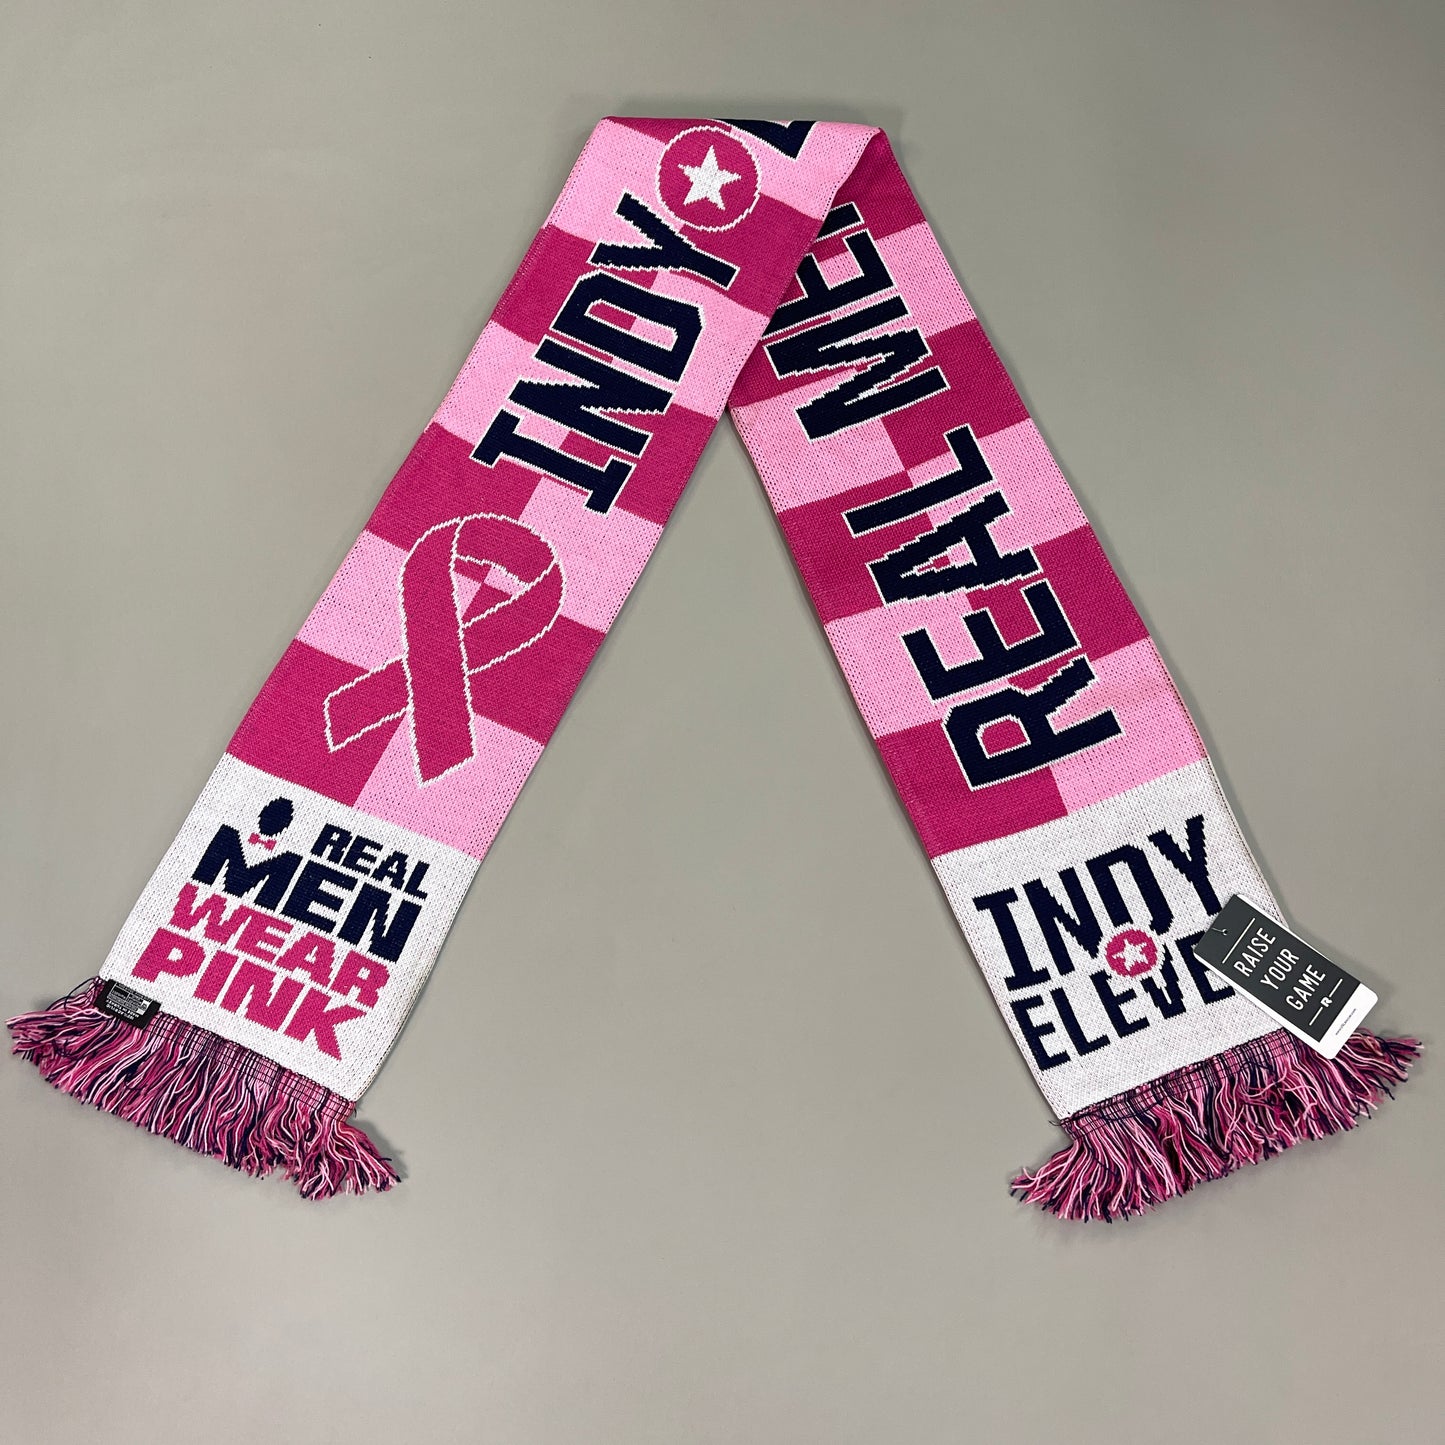 USL Real Men Wear Pink Indy Eleven Indiana Ruffneck Scarf Pink Ribbon Cancer Awareness (NEW)